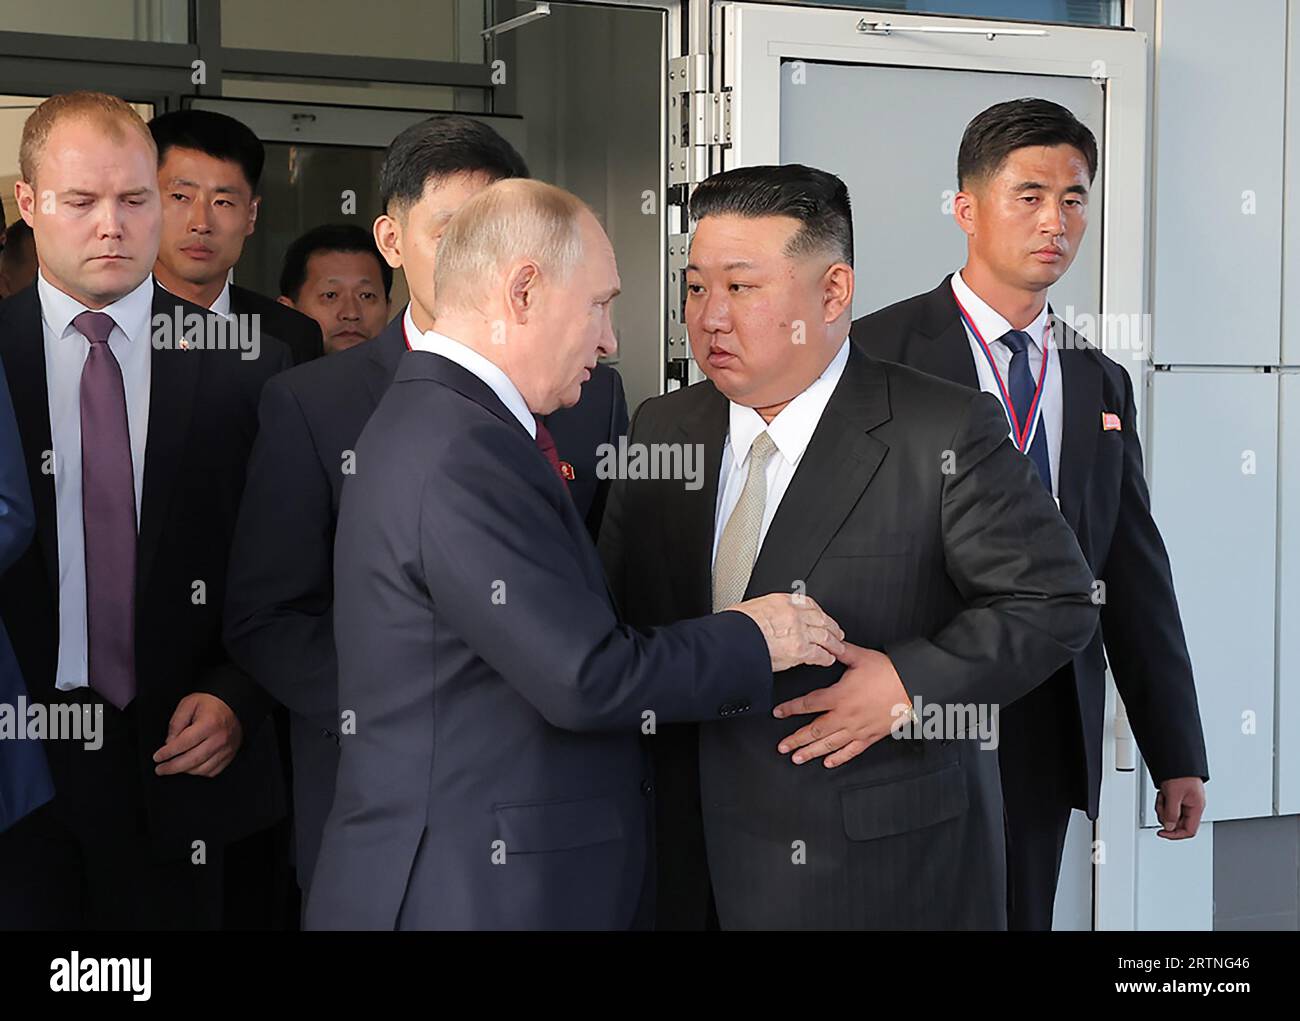 A photo provided by the North Korean government on september 14, shows that, North Korean leader Kim Jong Un (C-R), bids farewell to Russian President Vladimir Putin (C-L), as he departs from the Vostochny cosmodrome in Amur region, Russia on Wednesday, September 13, 2023. North Korean state news agency KCNA said on Thursday that, Russian President Vladimir Putin has accepted an invitation from North Korean leader Kim Jong Un to visit Pyongyang at Putin's 'convenient time'. The two leaders met in Russia's Far East on Wednesday for their first face-to-face summit in four years. During the summi Stock Photo